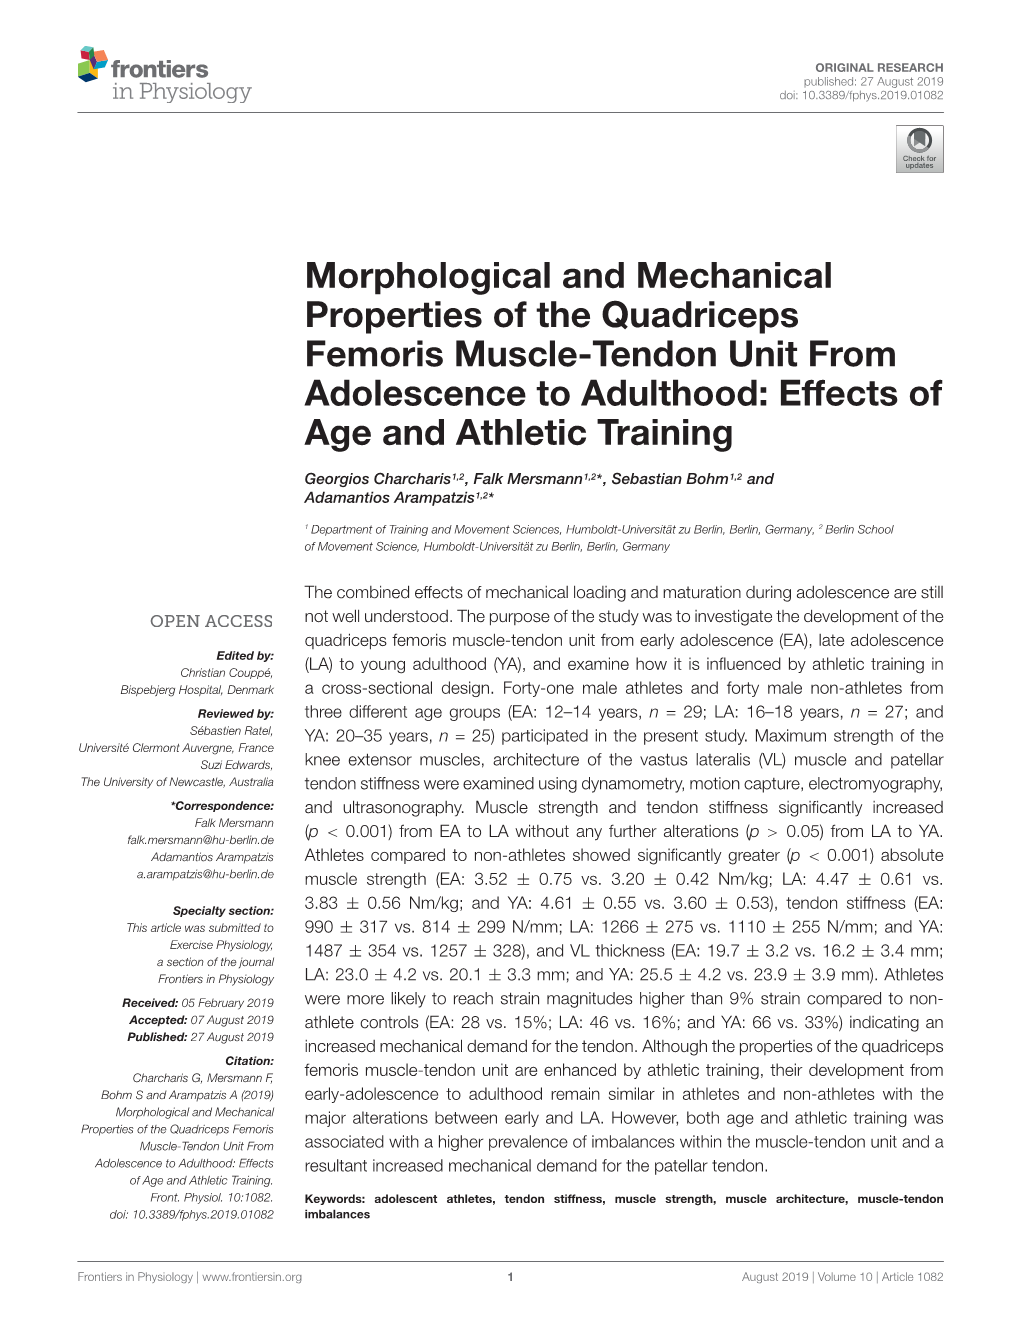 Morphological and Mechanical Properties of the Quadriceps Femoris Muscle-Tendon Unit from Adolescence to Adulthood: Effects of Age and Athletic Training